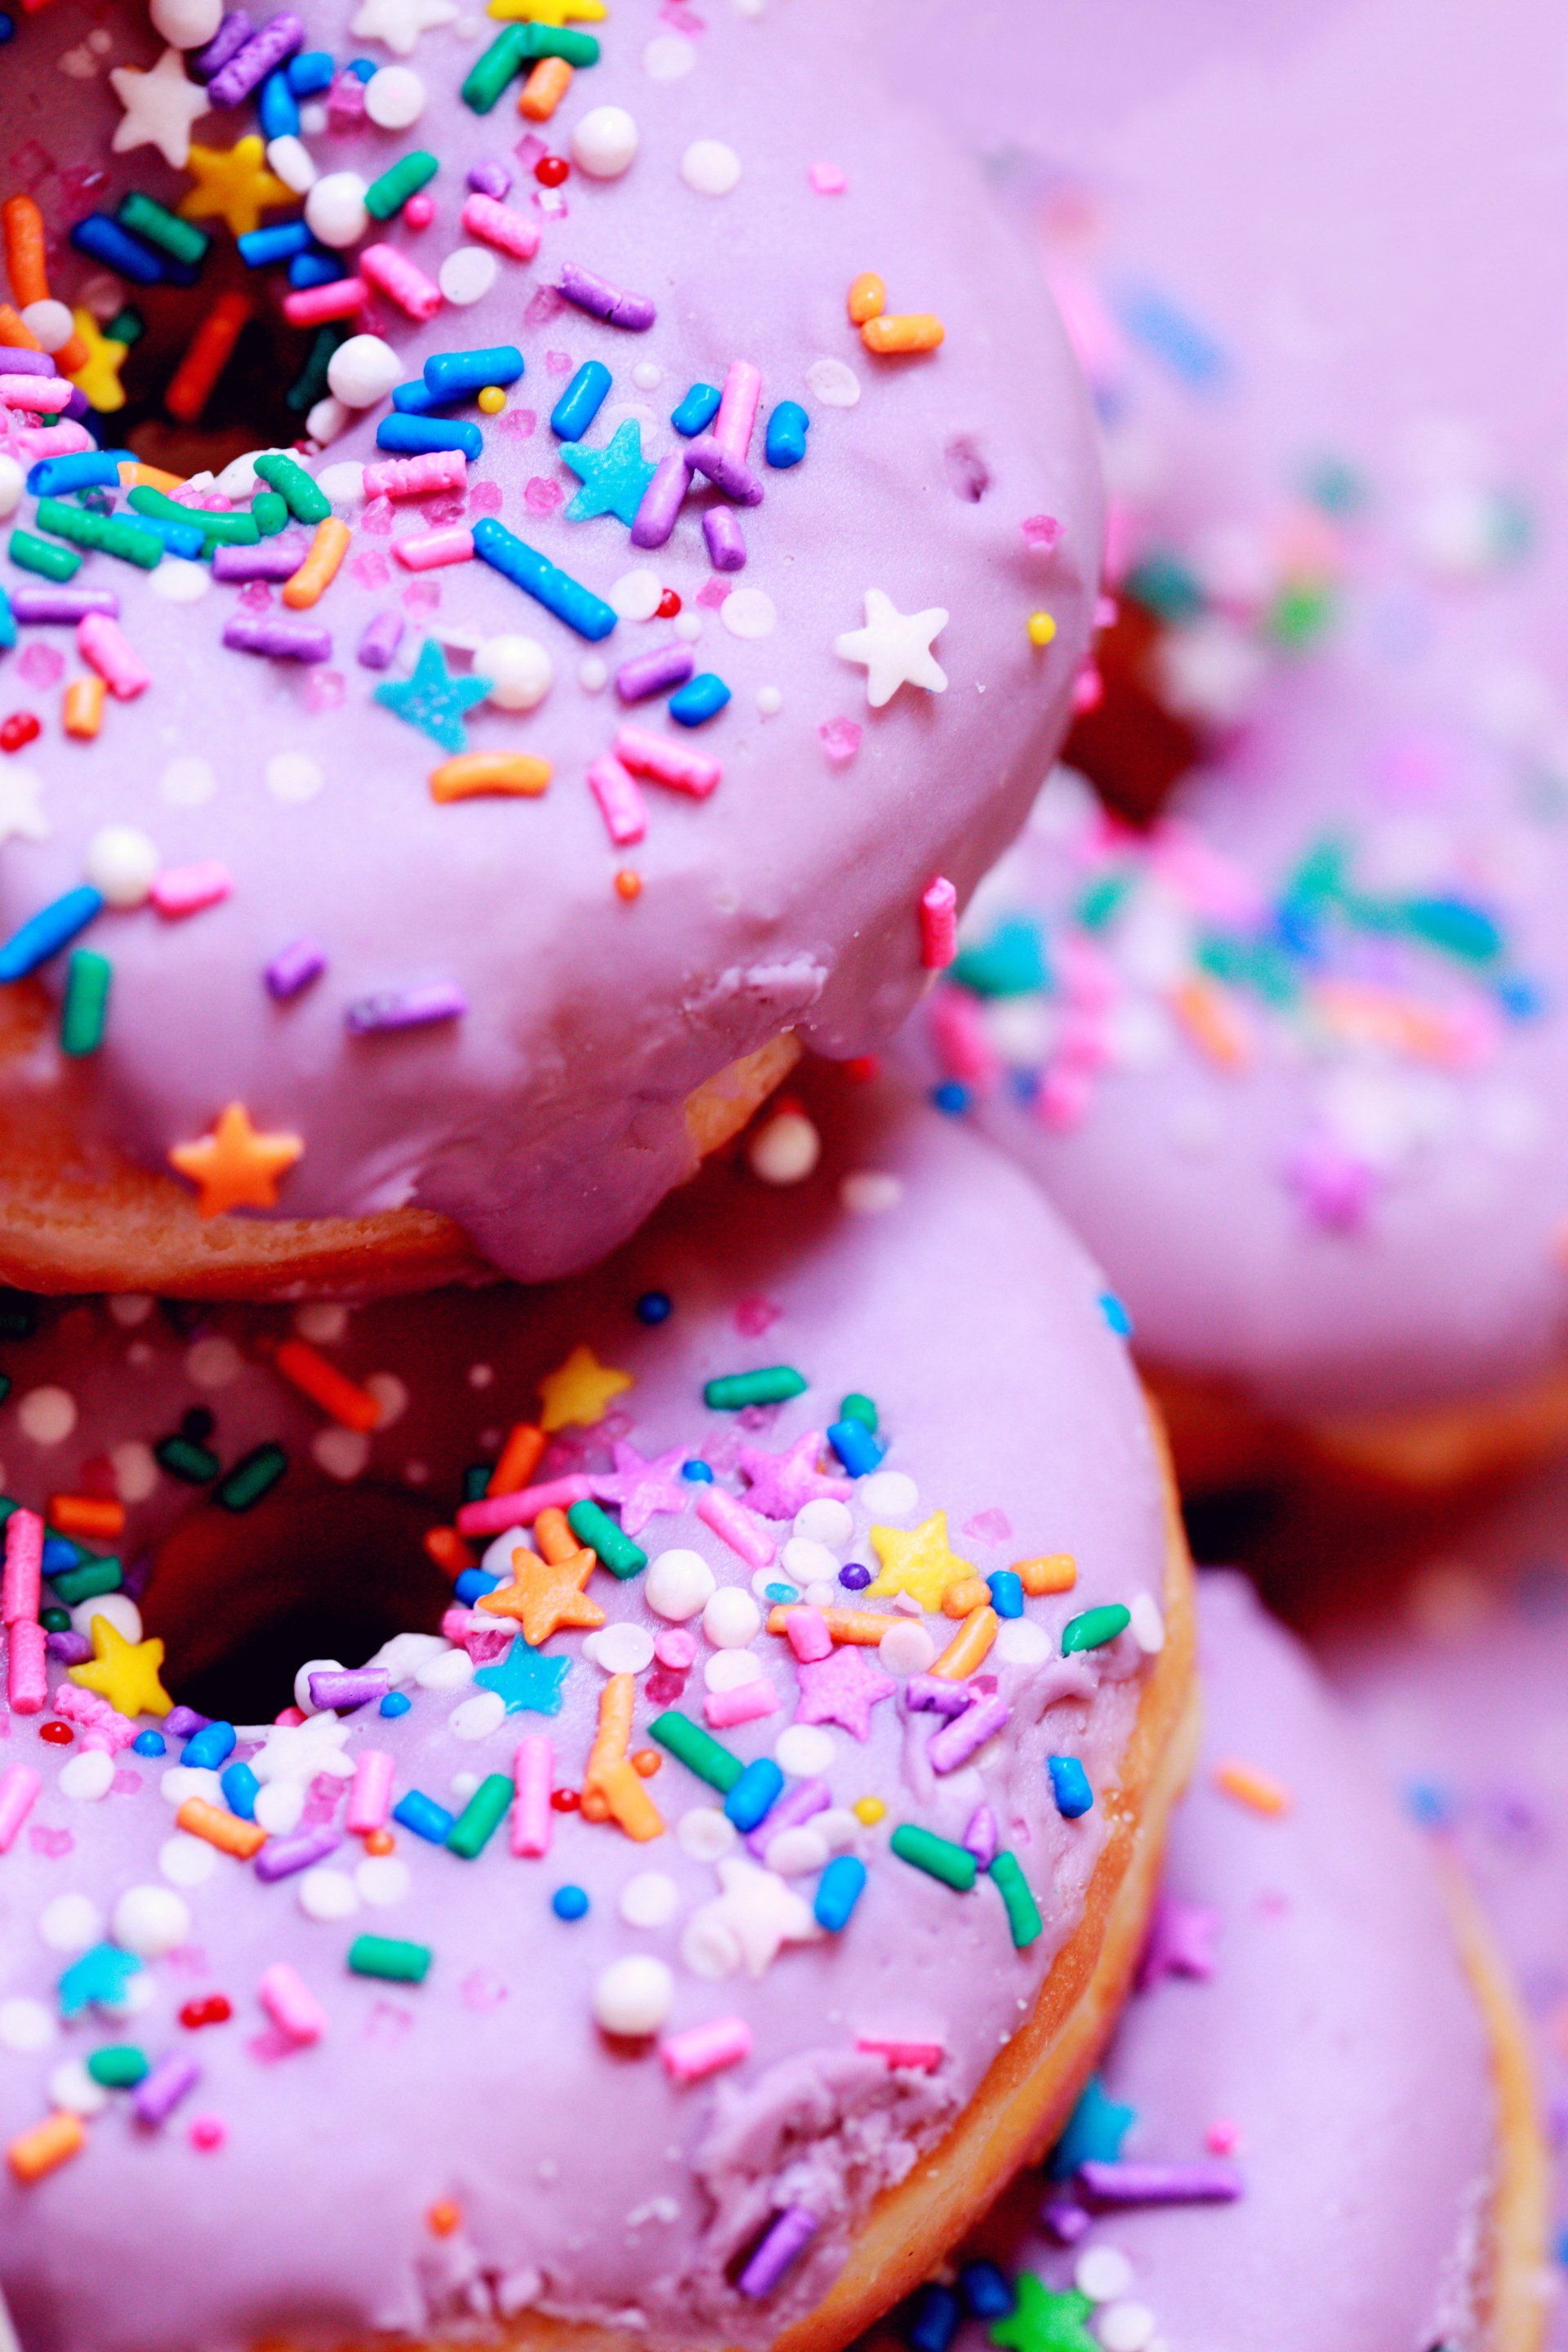 zoomed in picture of donuts with sprinkles - food to avoid with dentures